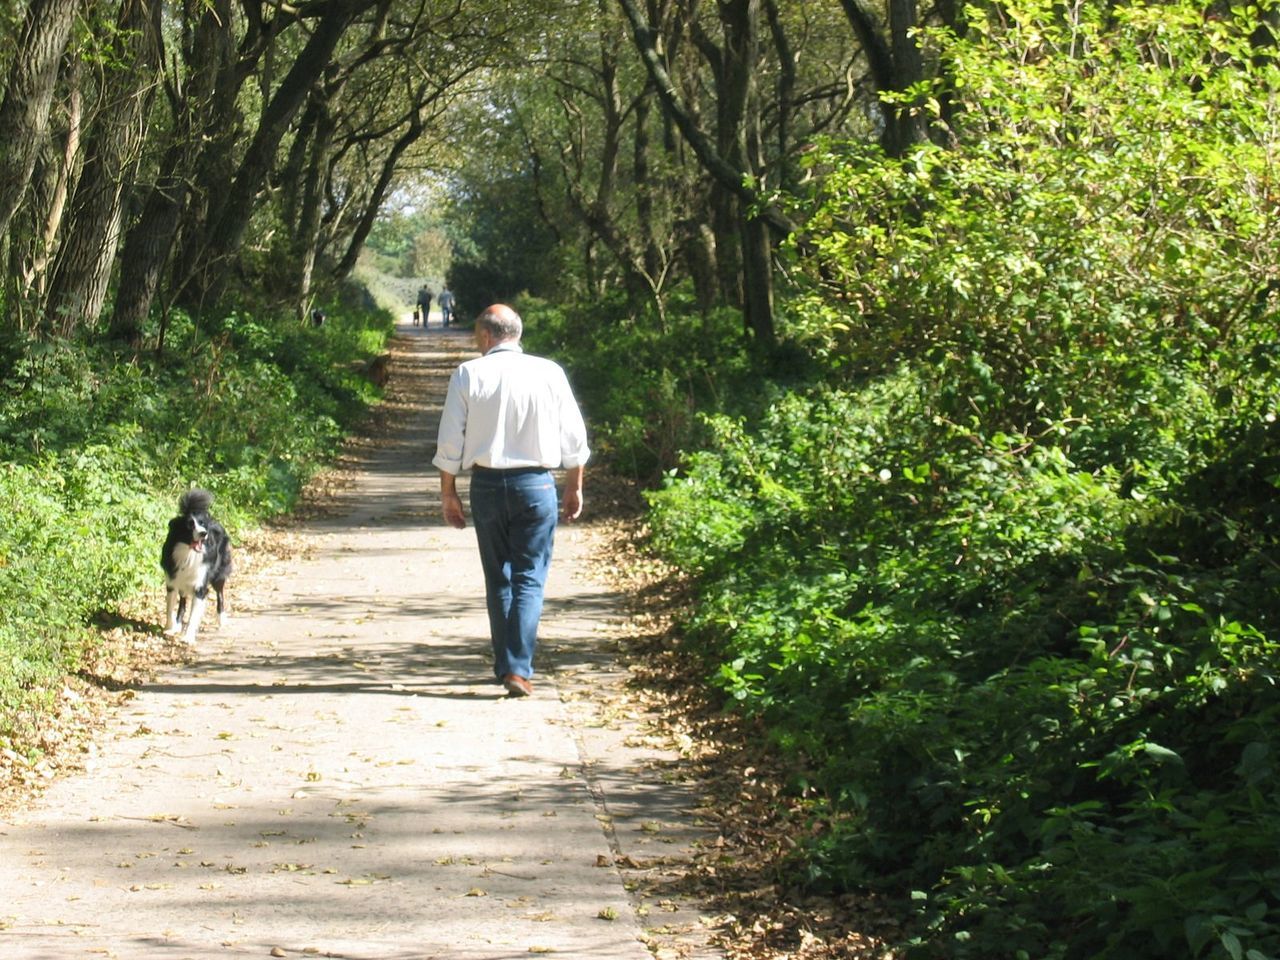 REAR VIEW OF PERSON WITH DOG WALKING ON FOOTPATH